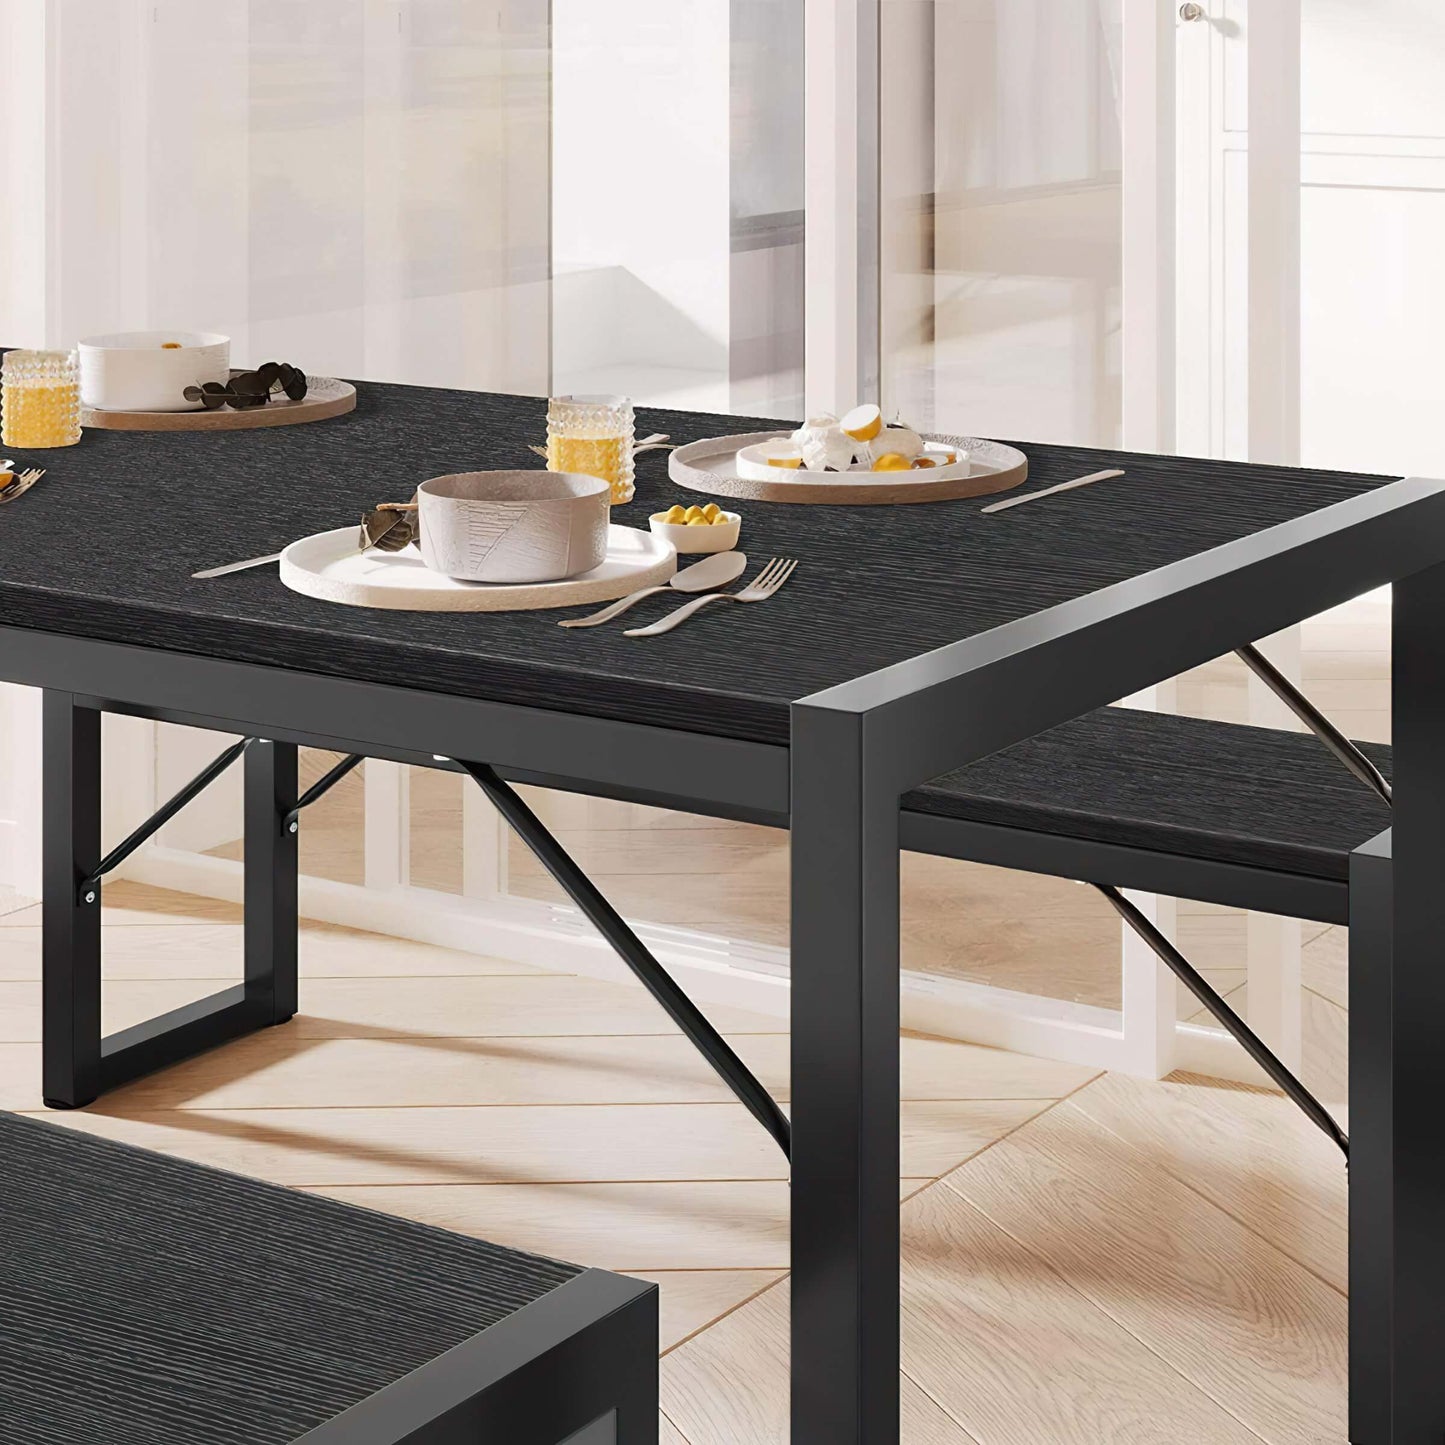 WETA 45.5" Dining Table Set for 4 with 2 Benches | Ideal for Kitchen & Dining Room | Stylish & Functional Design